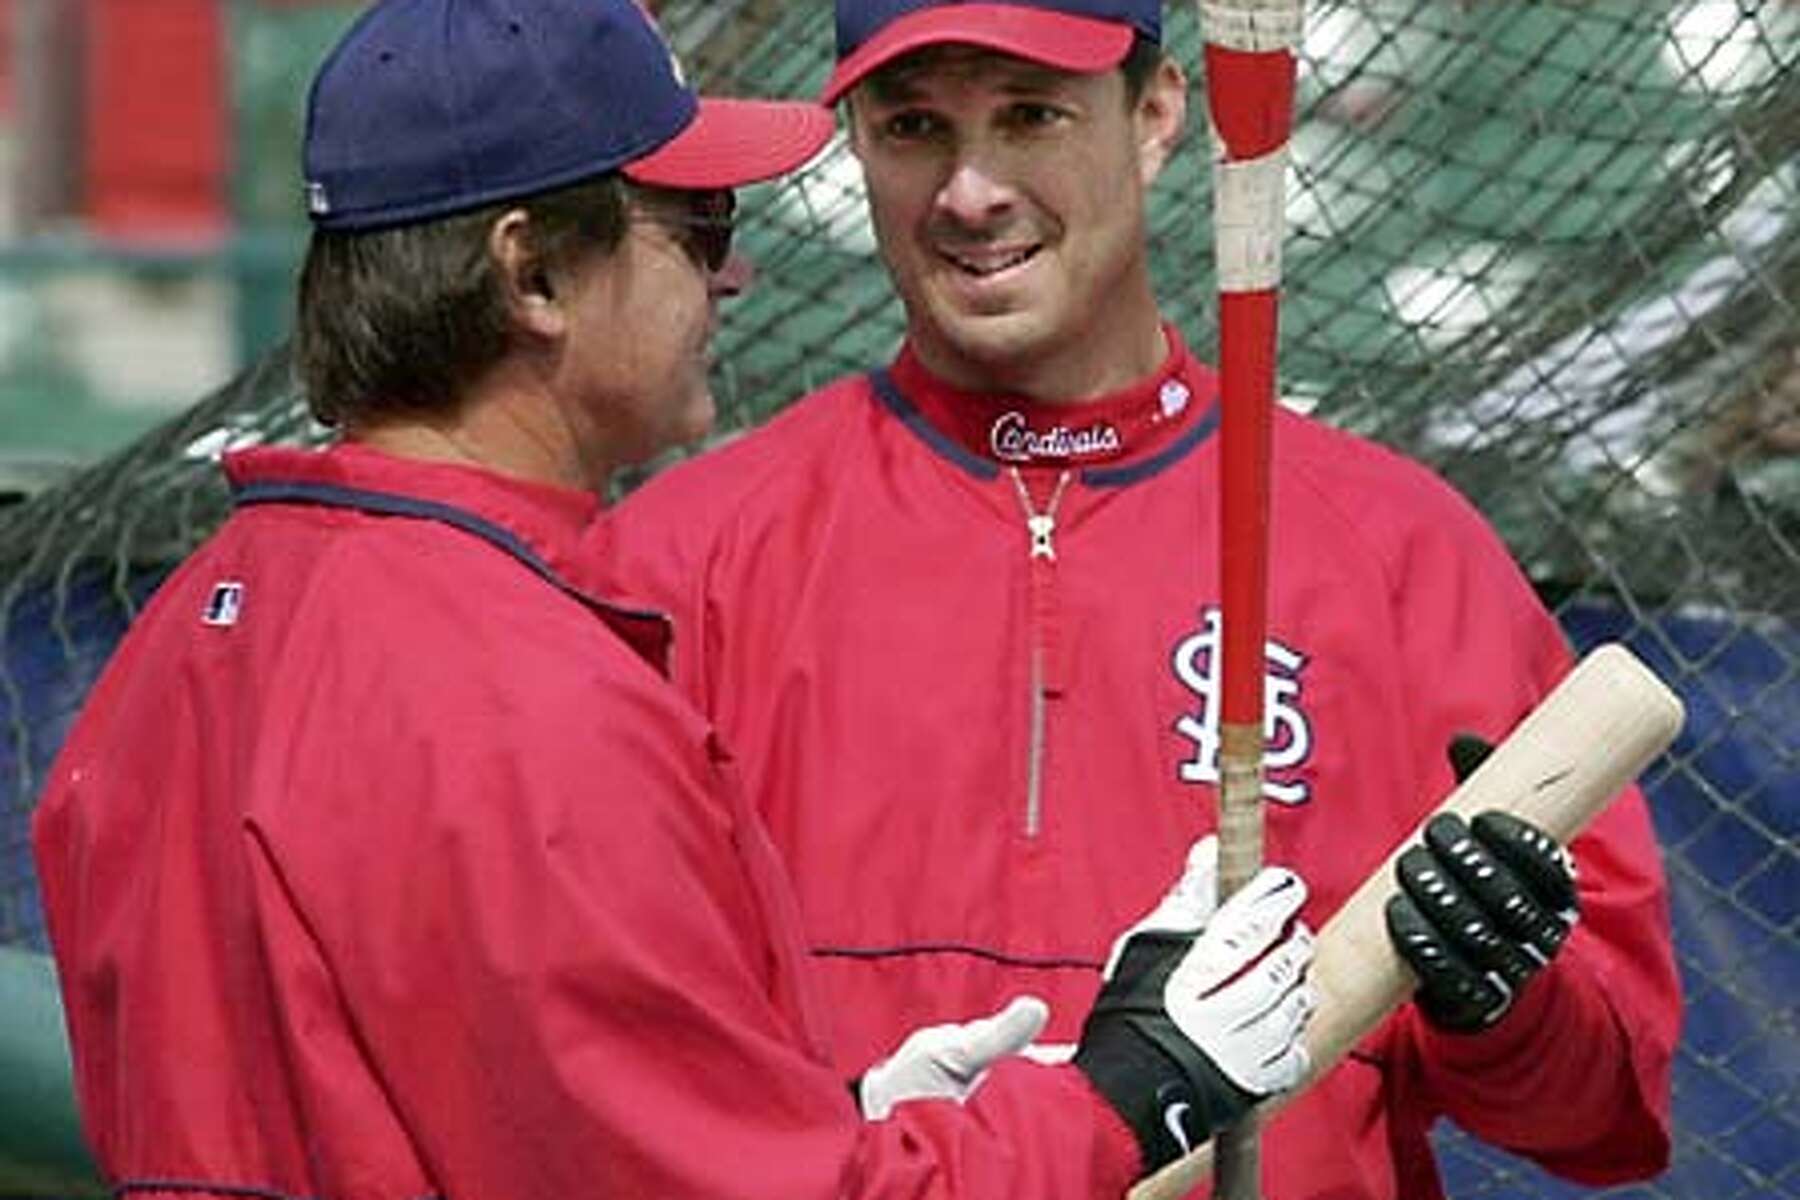 How Tino Martinez went from Yankees to Cardinals